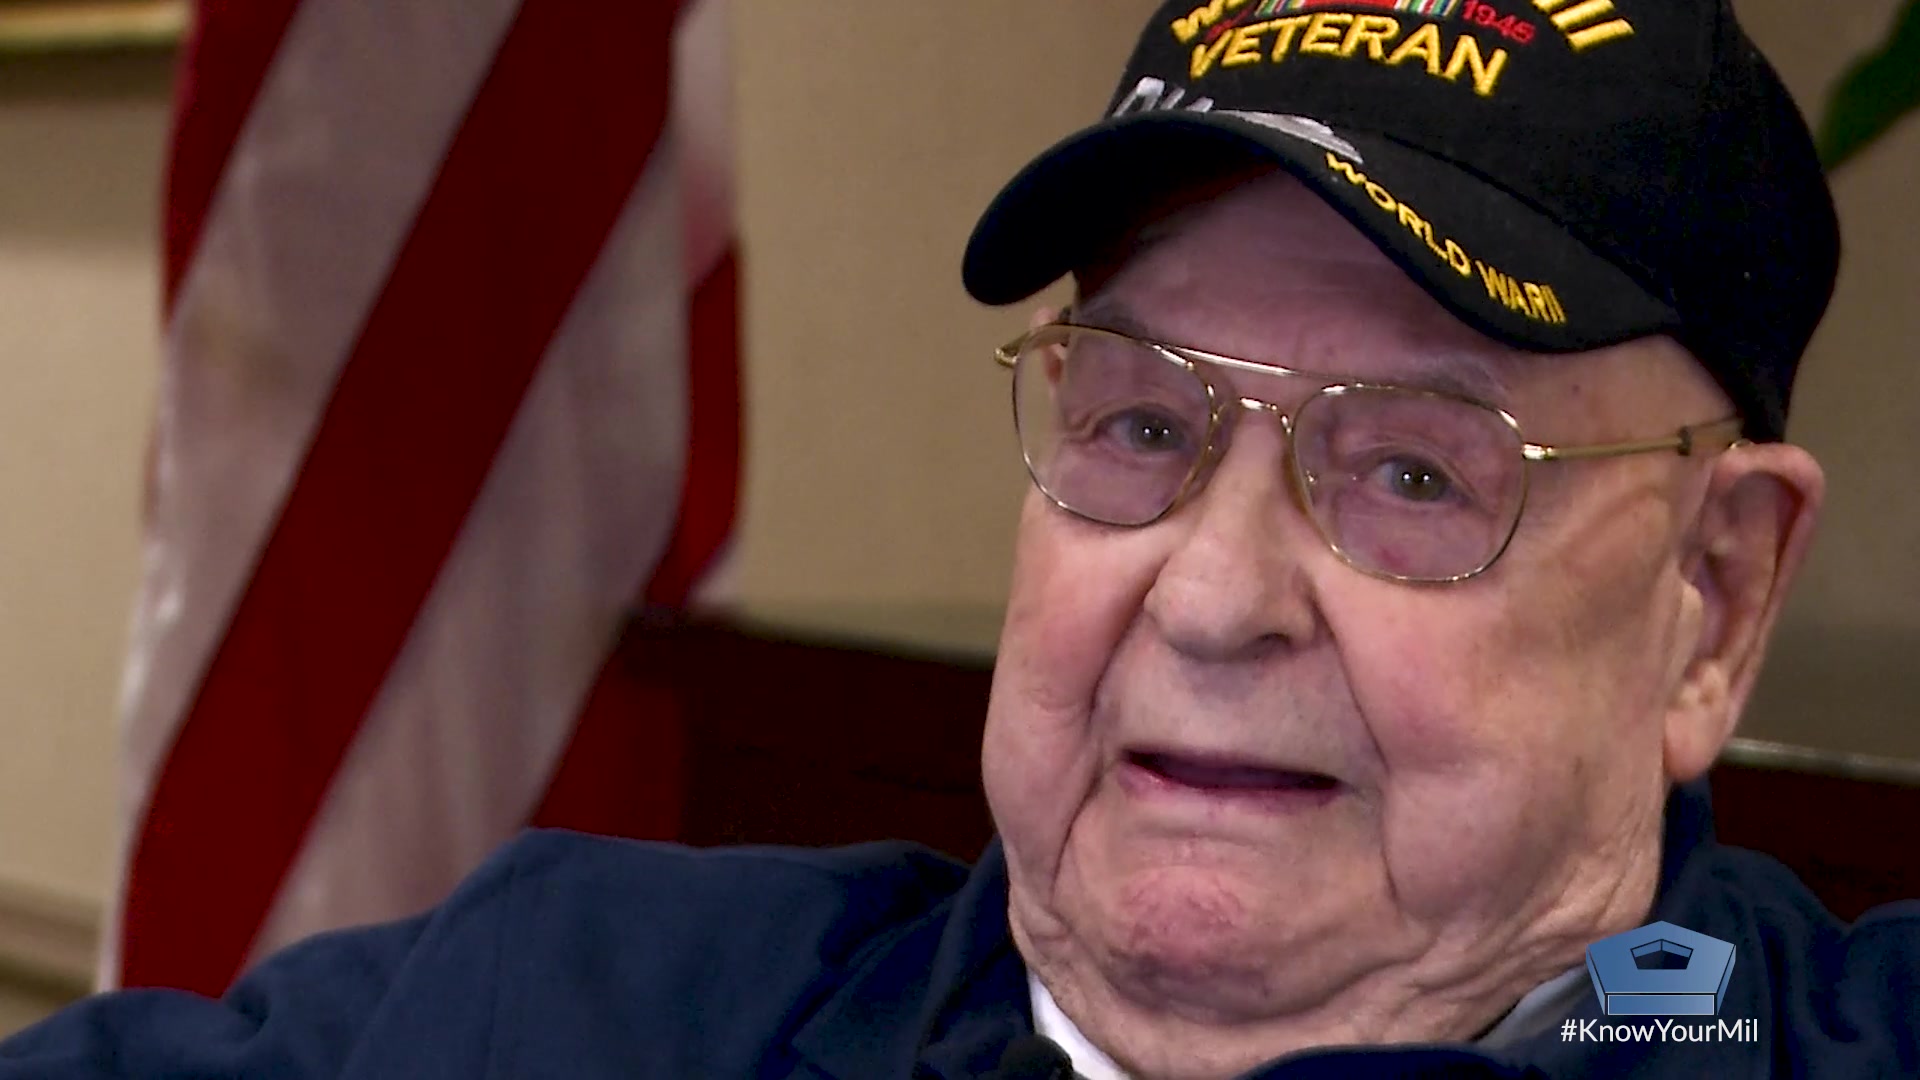 Retired Air Force Lt. Col. Raymond Schaaf passed away just ten days after taking flight with Honor Flight Austin to view the National WWII Memorial in Washington. Before he passed, he shared a memory of his first combat mission in the skies over Germany.